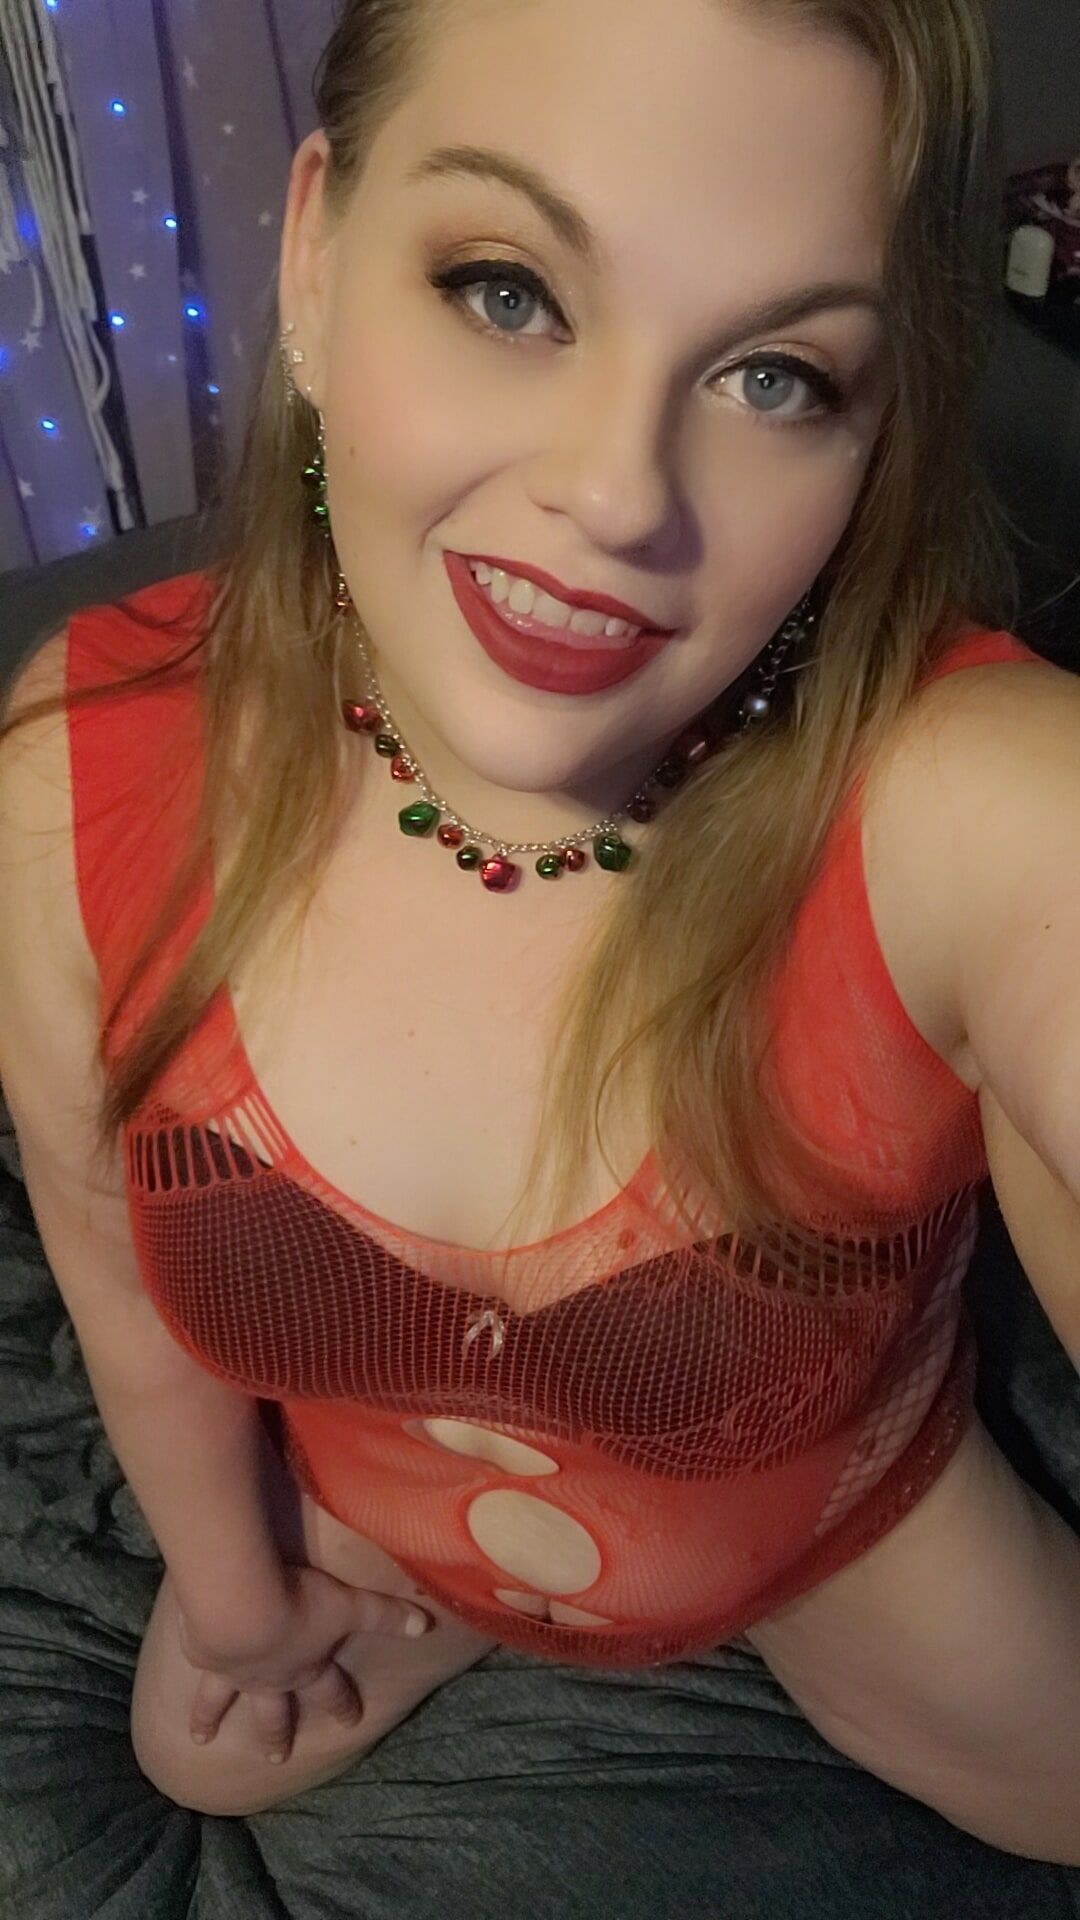 Bbw milf is your Christmas present #8